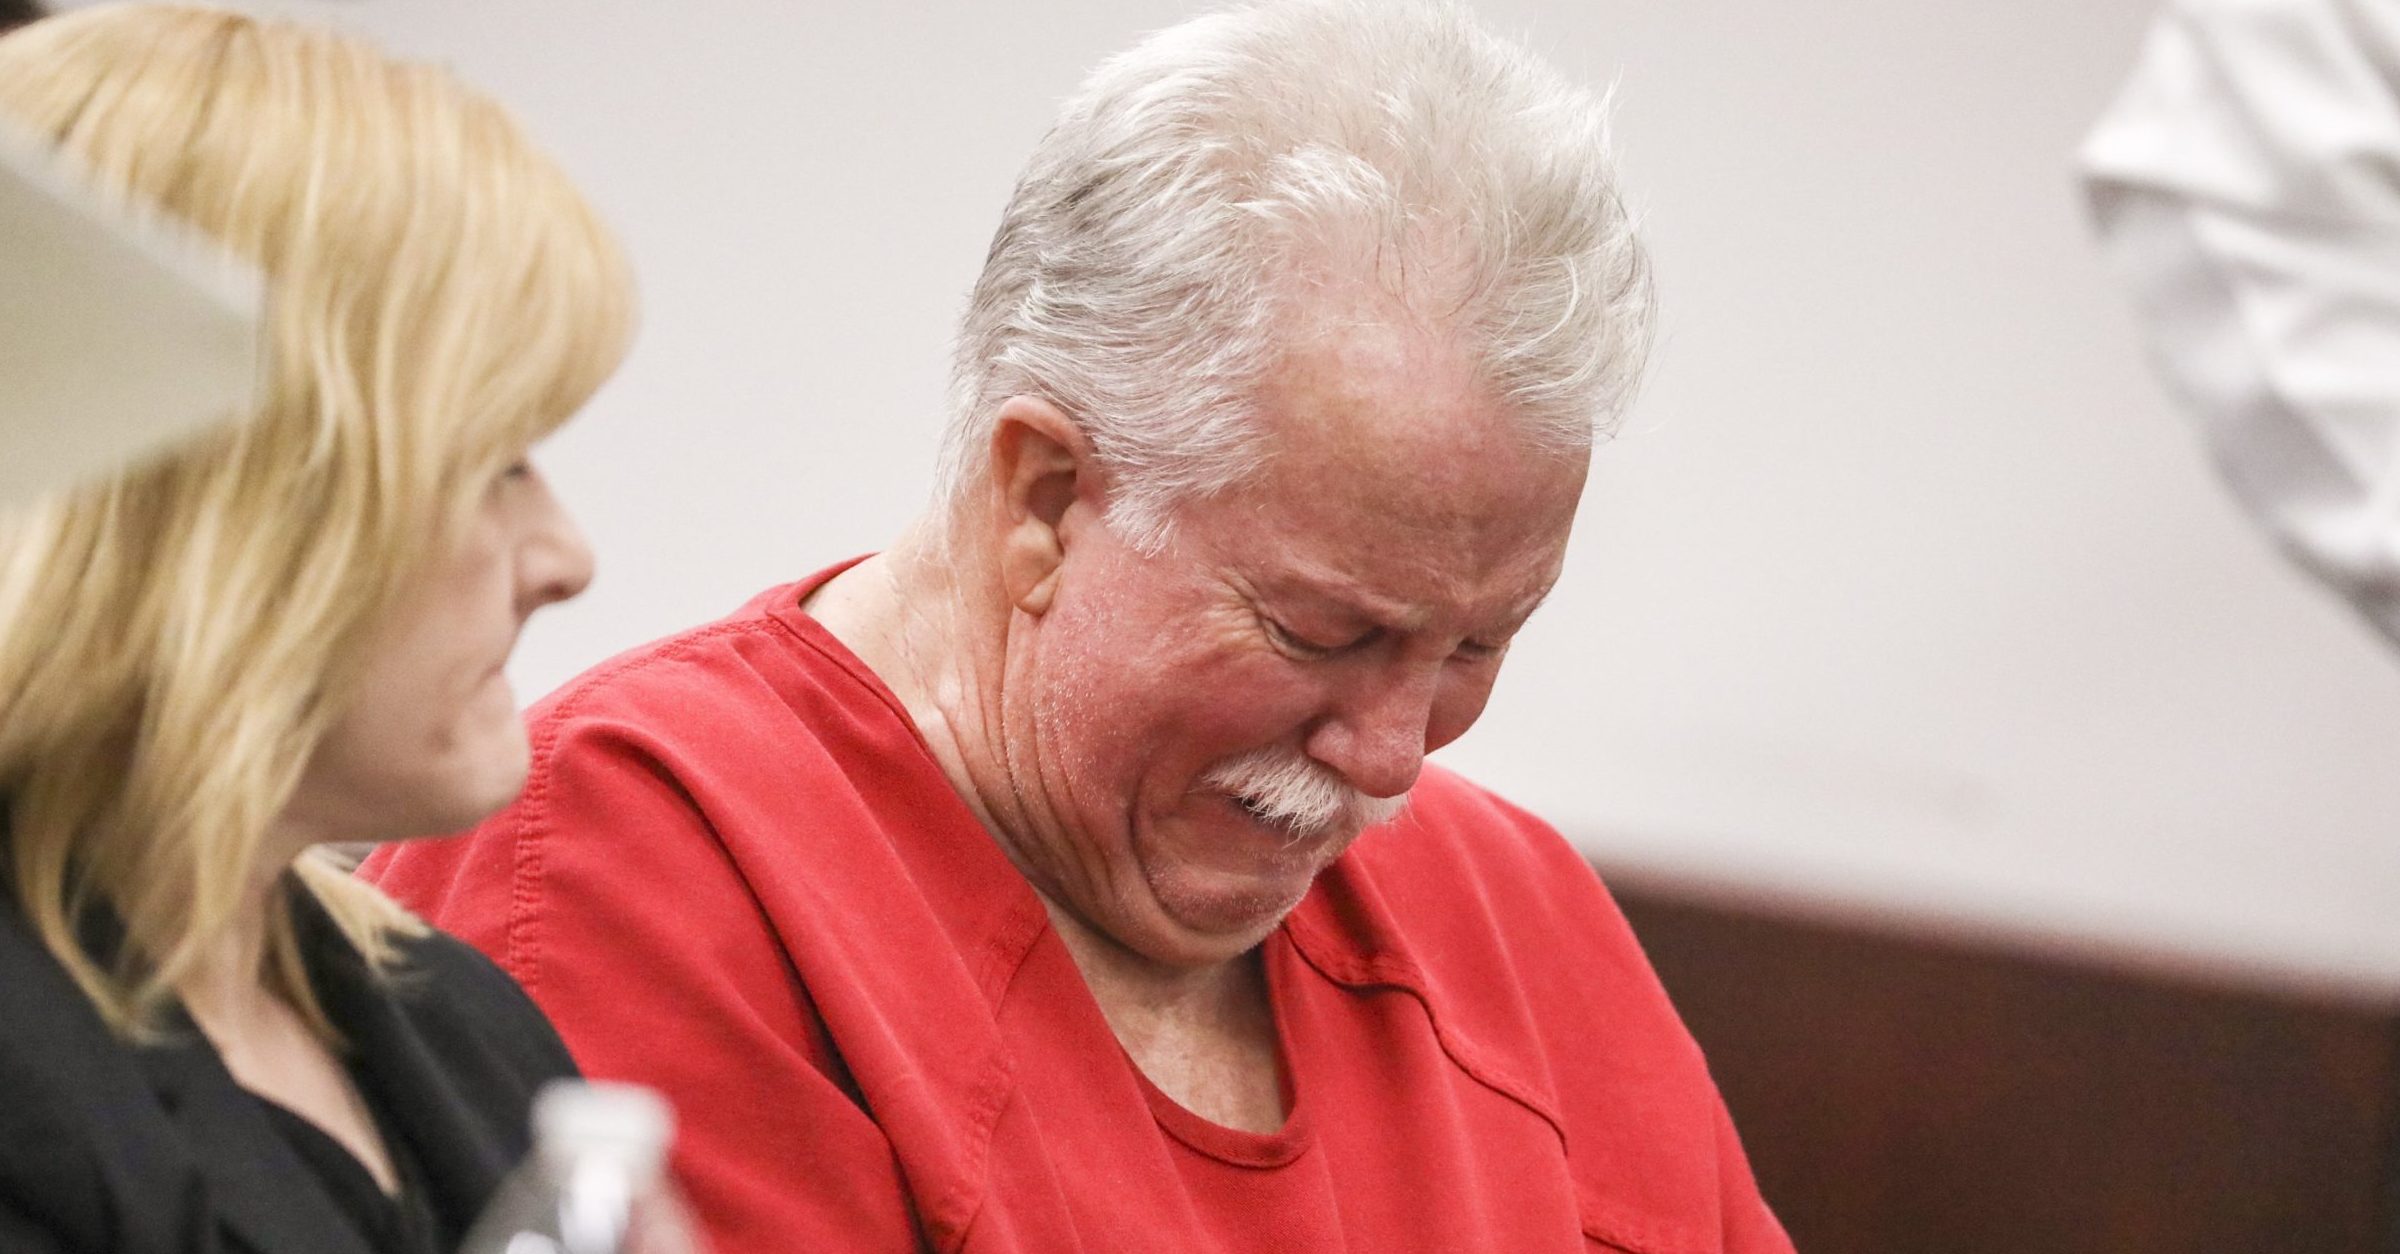 Cold case murder suspect Donald Santini weeps moments before he is denied bond by Judge Catherine Catlin during his hearing Thursday in Tampa, Florida. Santini is accused of strangling Cynthia Wood of Bradenton, Florida, in 1984.